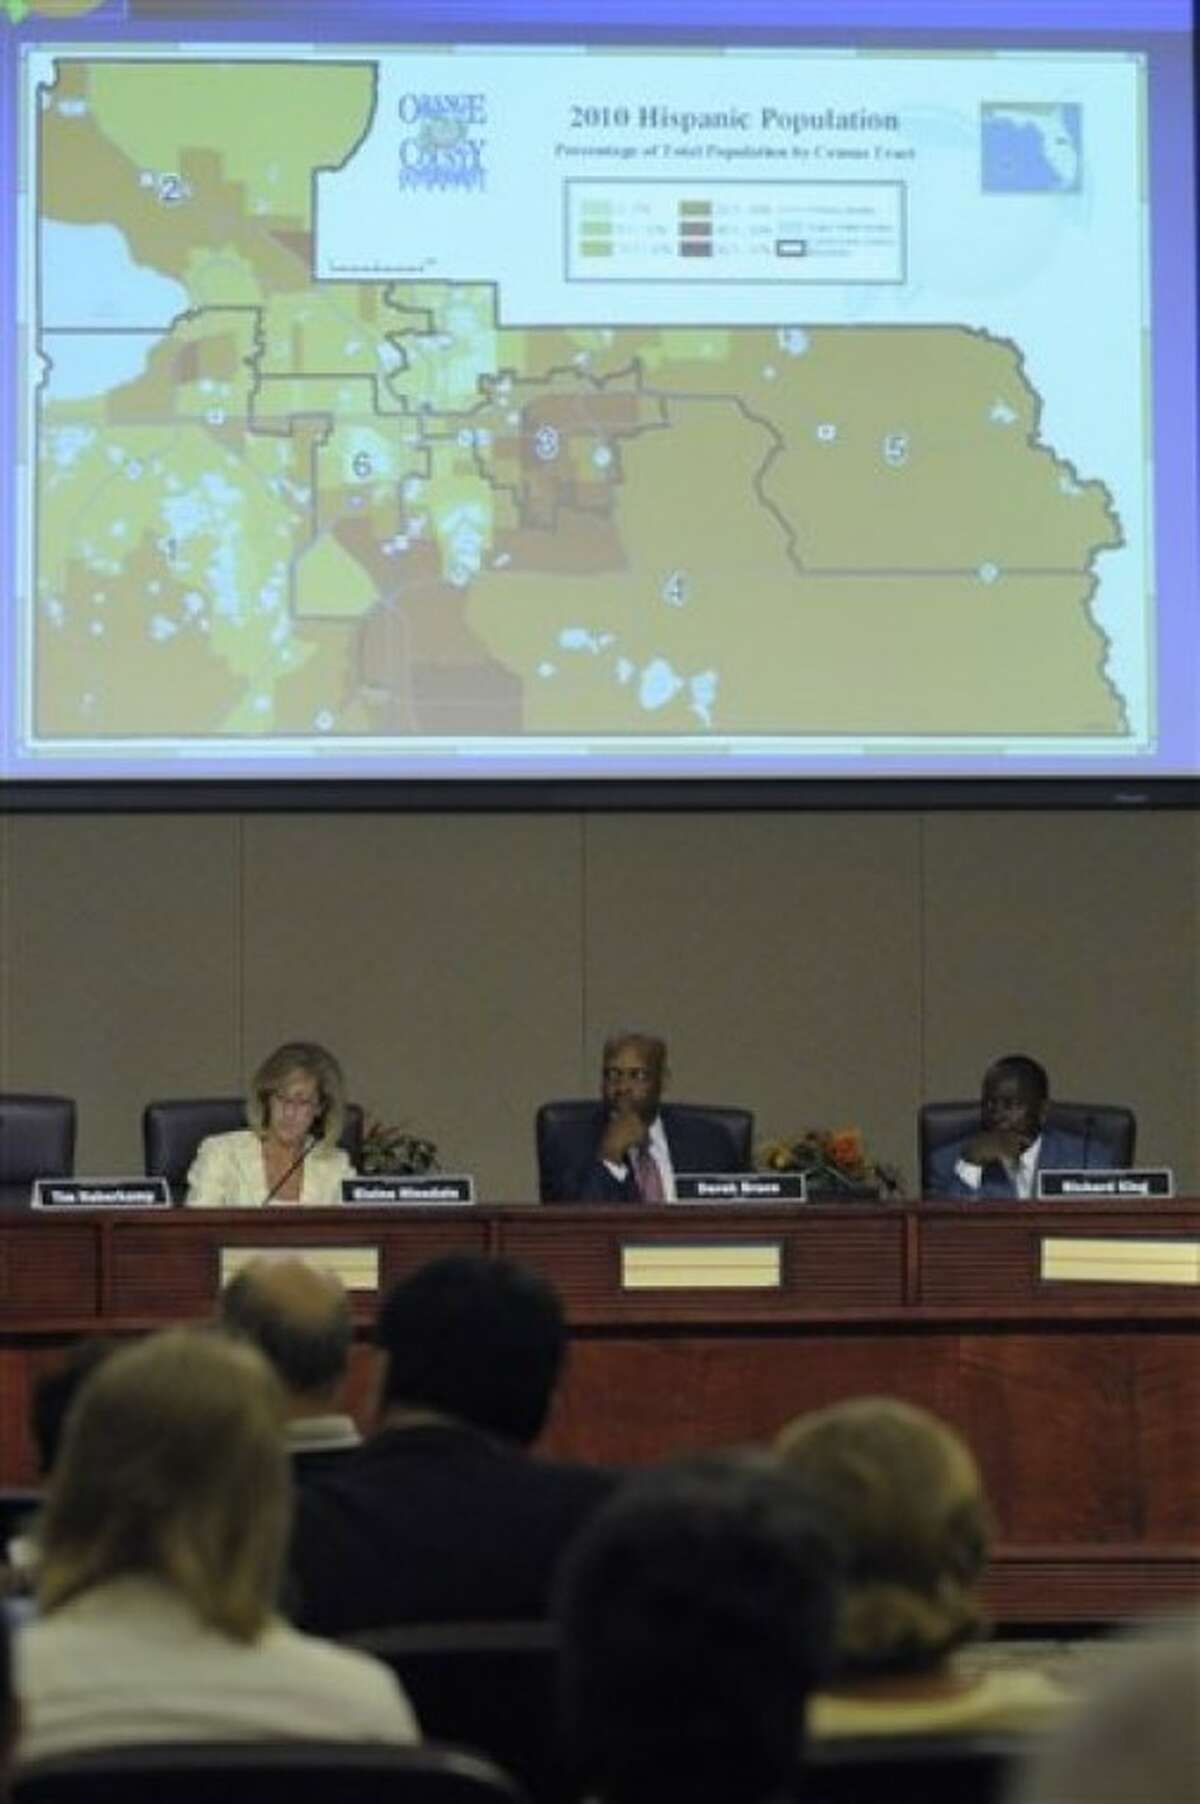 In a April 27, 2011 photo, committee members Elaine Hinsdale, left, Derek Bruce, center, and Richard King listen to a presentation by the supervisor of elections office during a meeting of the Orange County Redistricting Advisory Committee in Orlando, Fla. (AP Photo/Phelan M. Ebenhack)